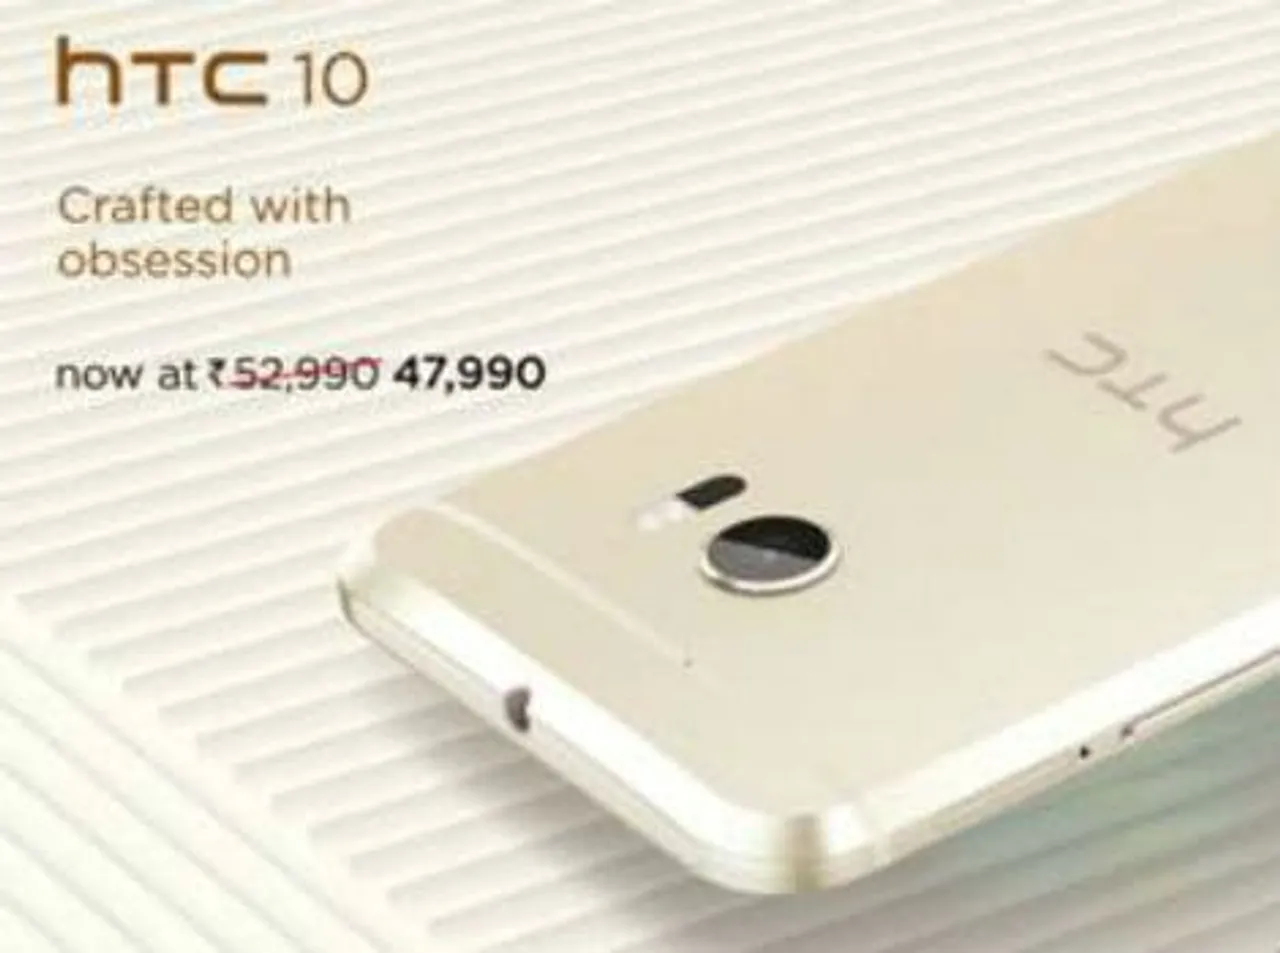 The Flagship HTC 10 Smartphone Now Available at a Discounted Price of Rs. 47,990